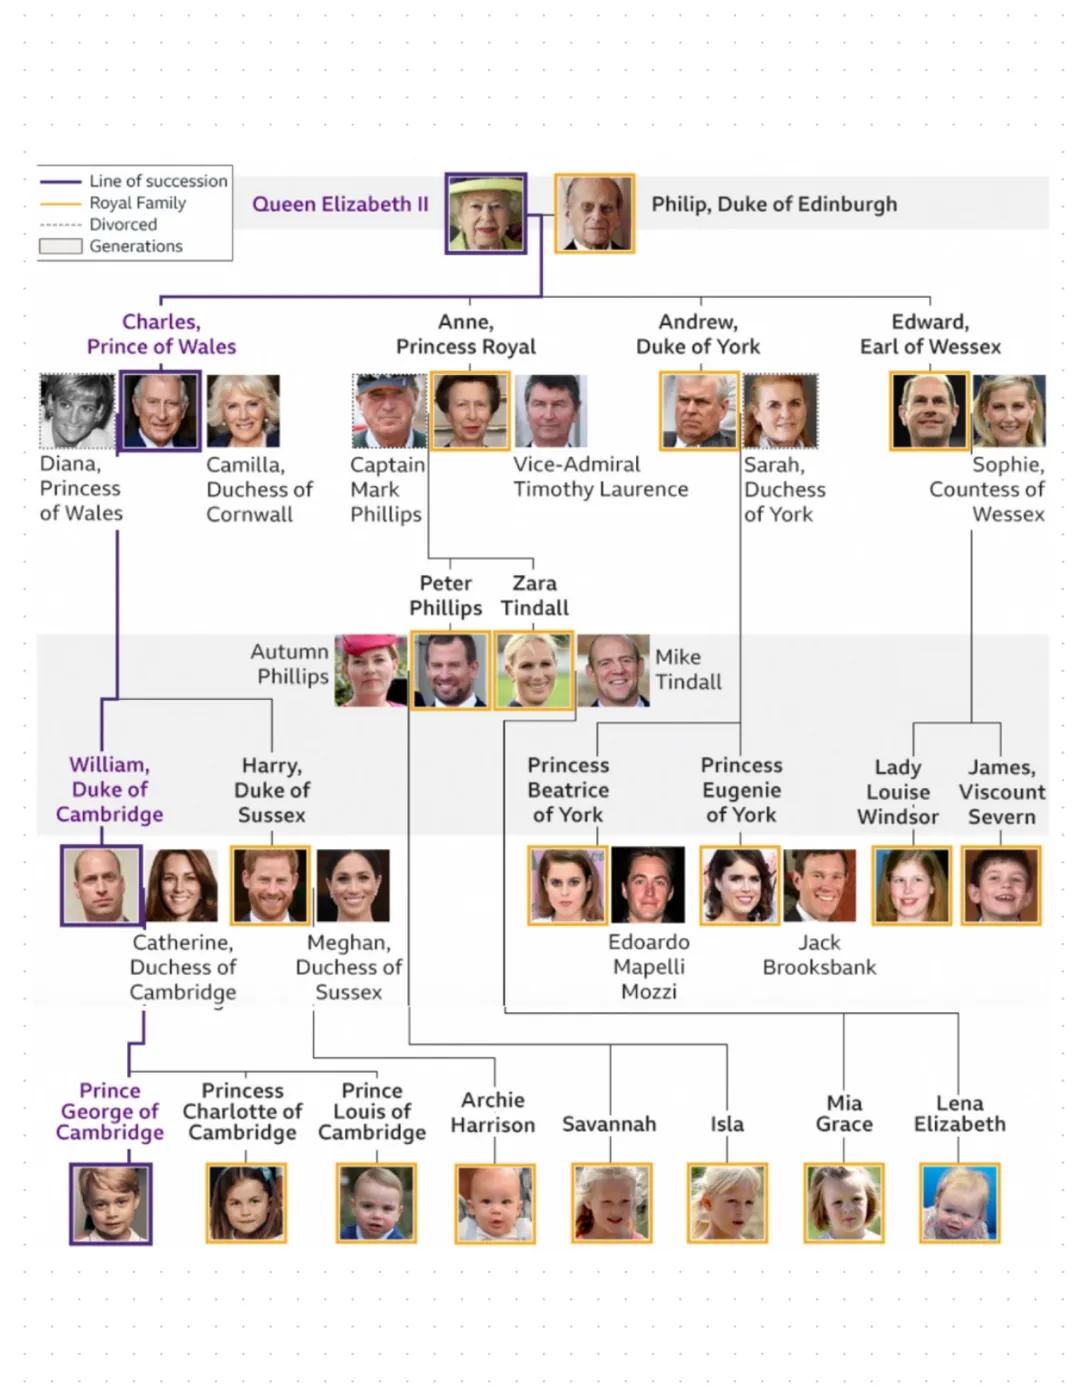 Royal family
Role of R.F.:
·carry out official duties in the UK
· represent members of the public
supports queen in making her guest welcome